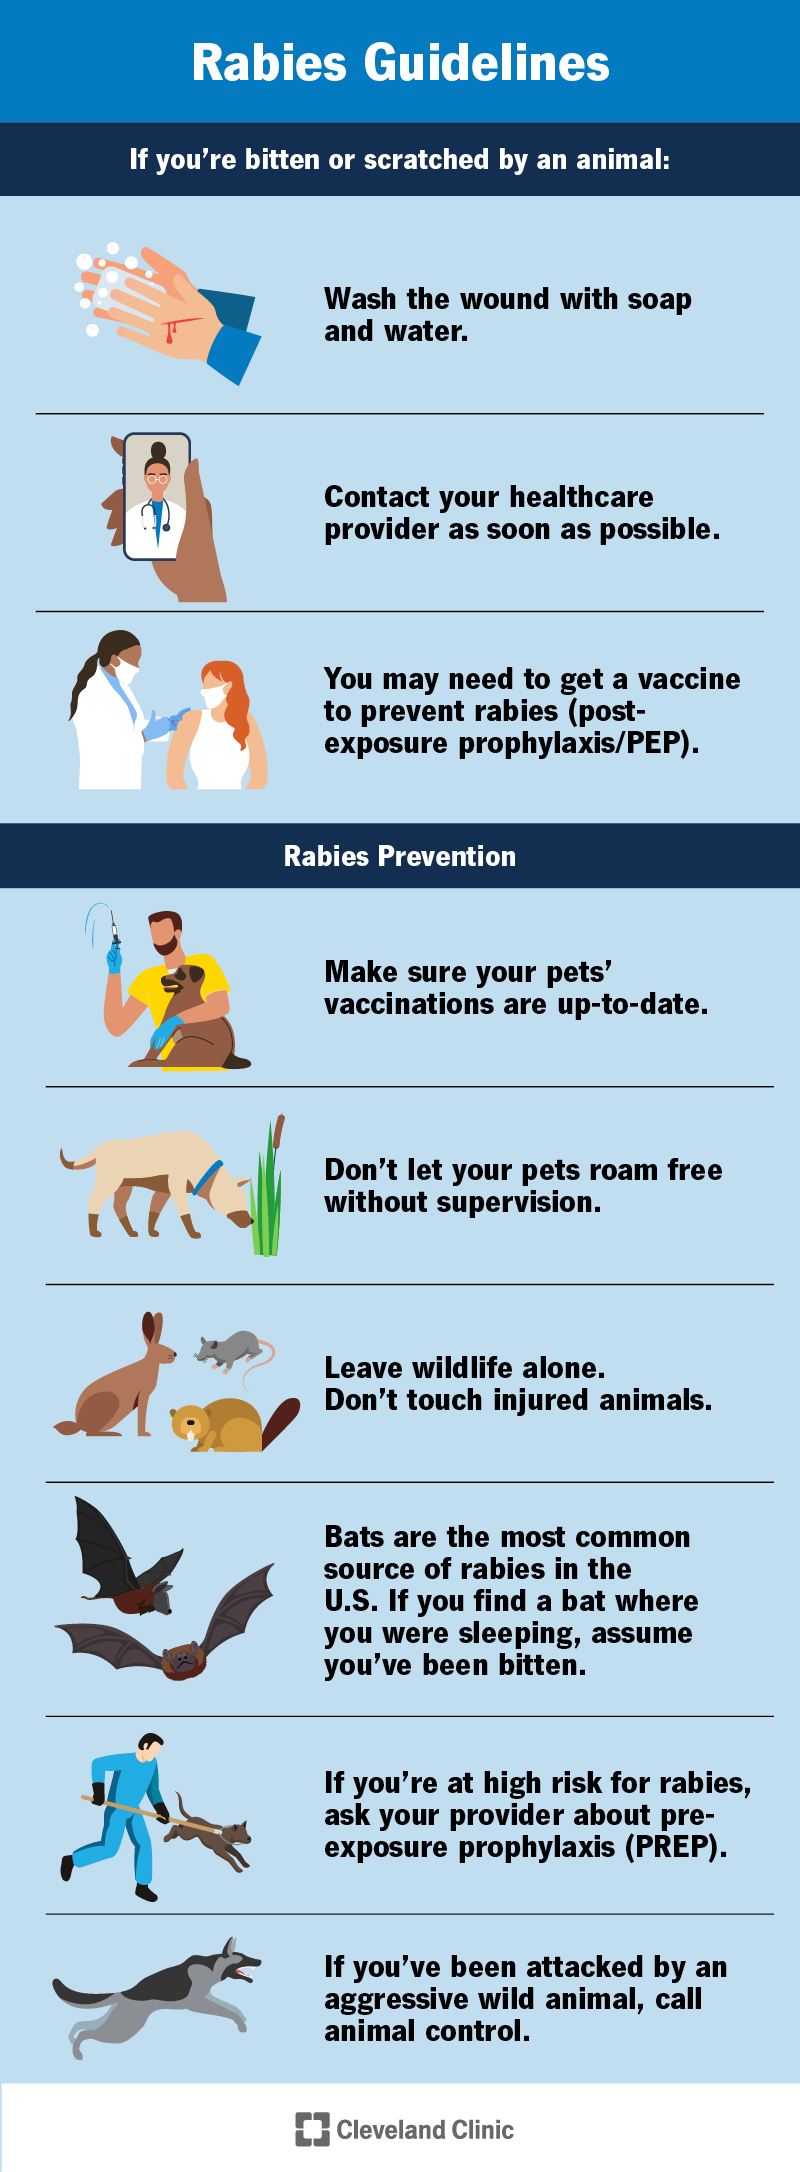 Rabies prevention tips. Clean all wounds. Ask your provider if you need a rabies shot. Leave wildlife alone. Vaccinate pets.